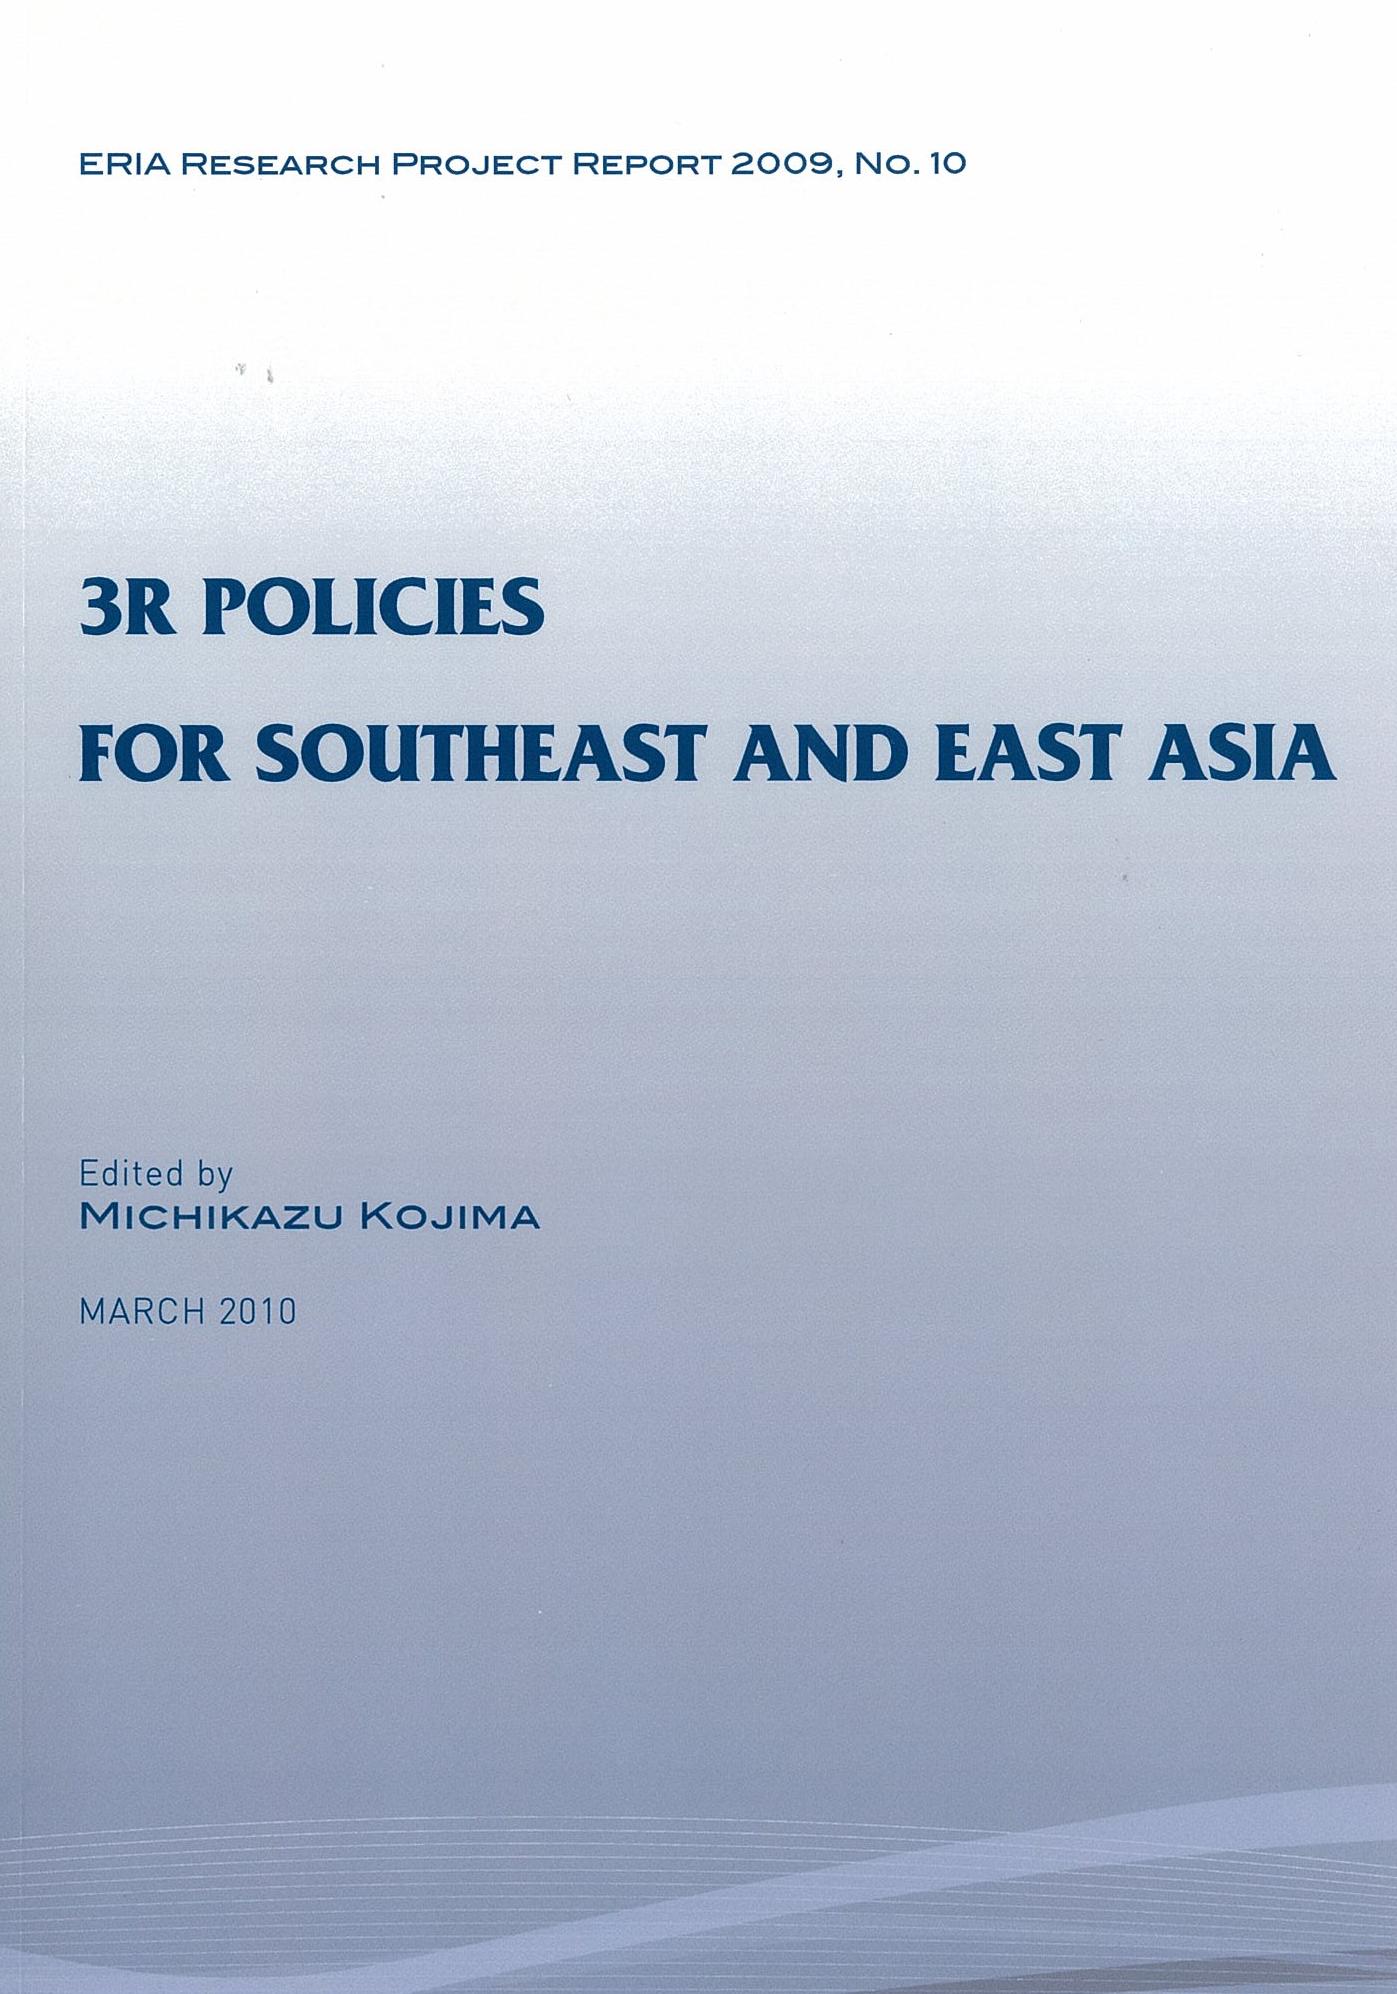 3R Policies for Southeast and East Asia (FY2009)